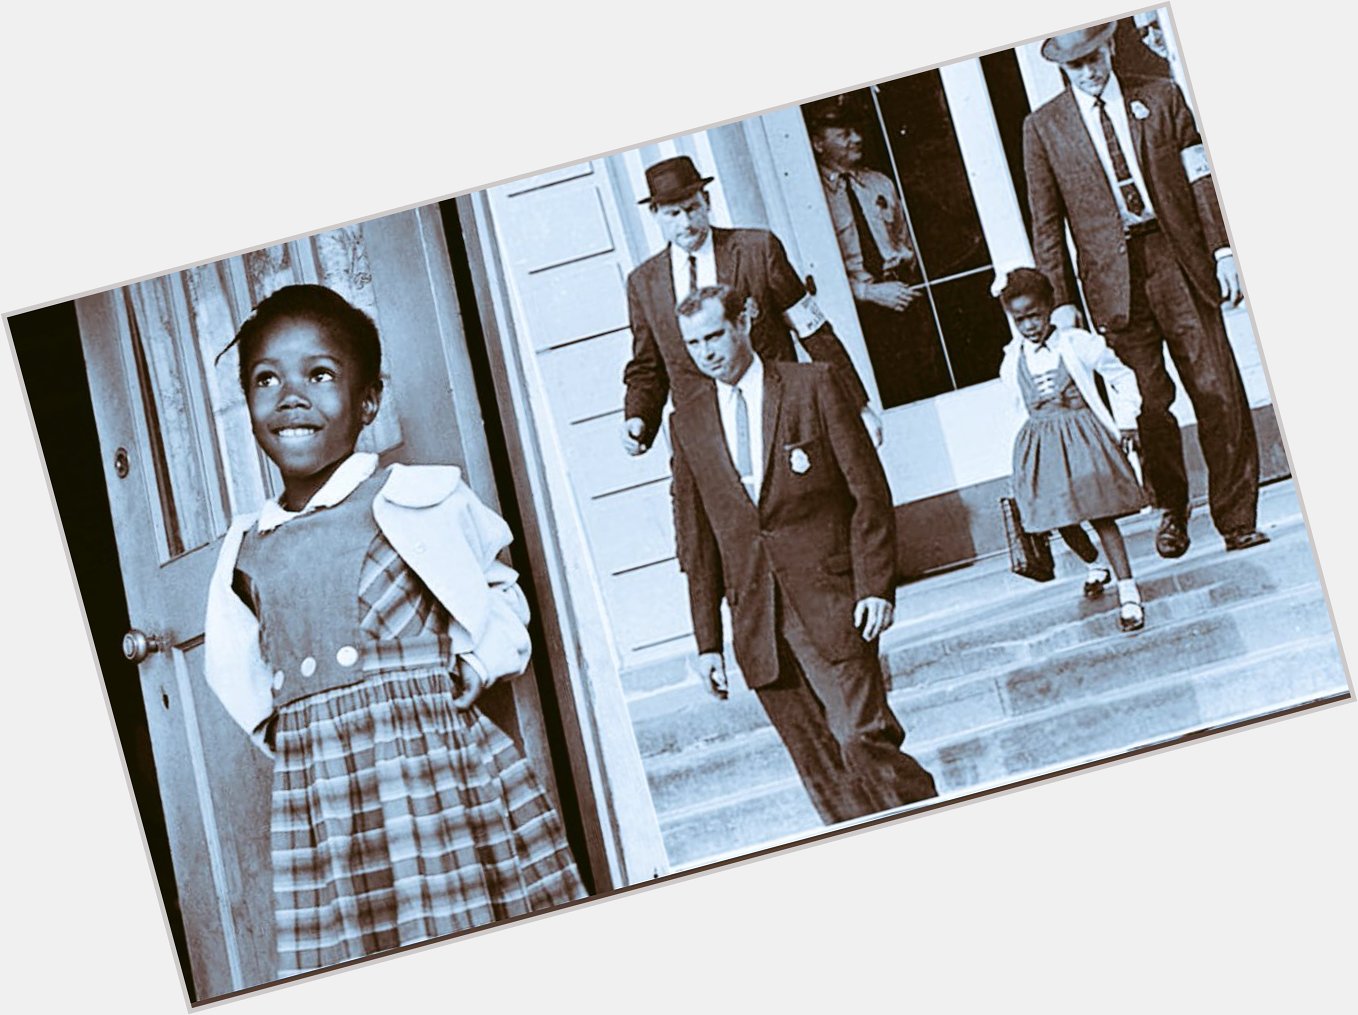 Bravery has a name and it is Ruby Bridges. Happy birthday, Ruby. 